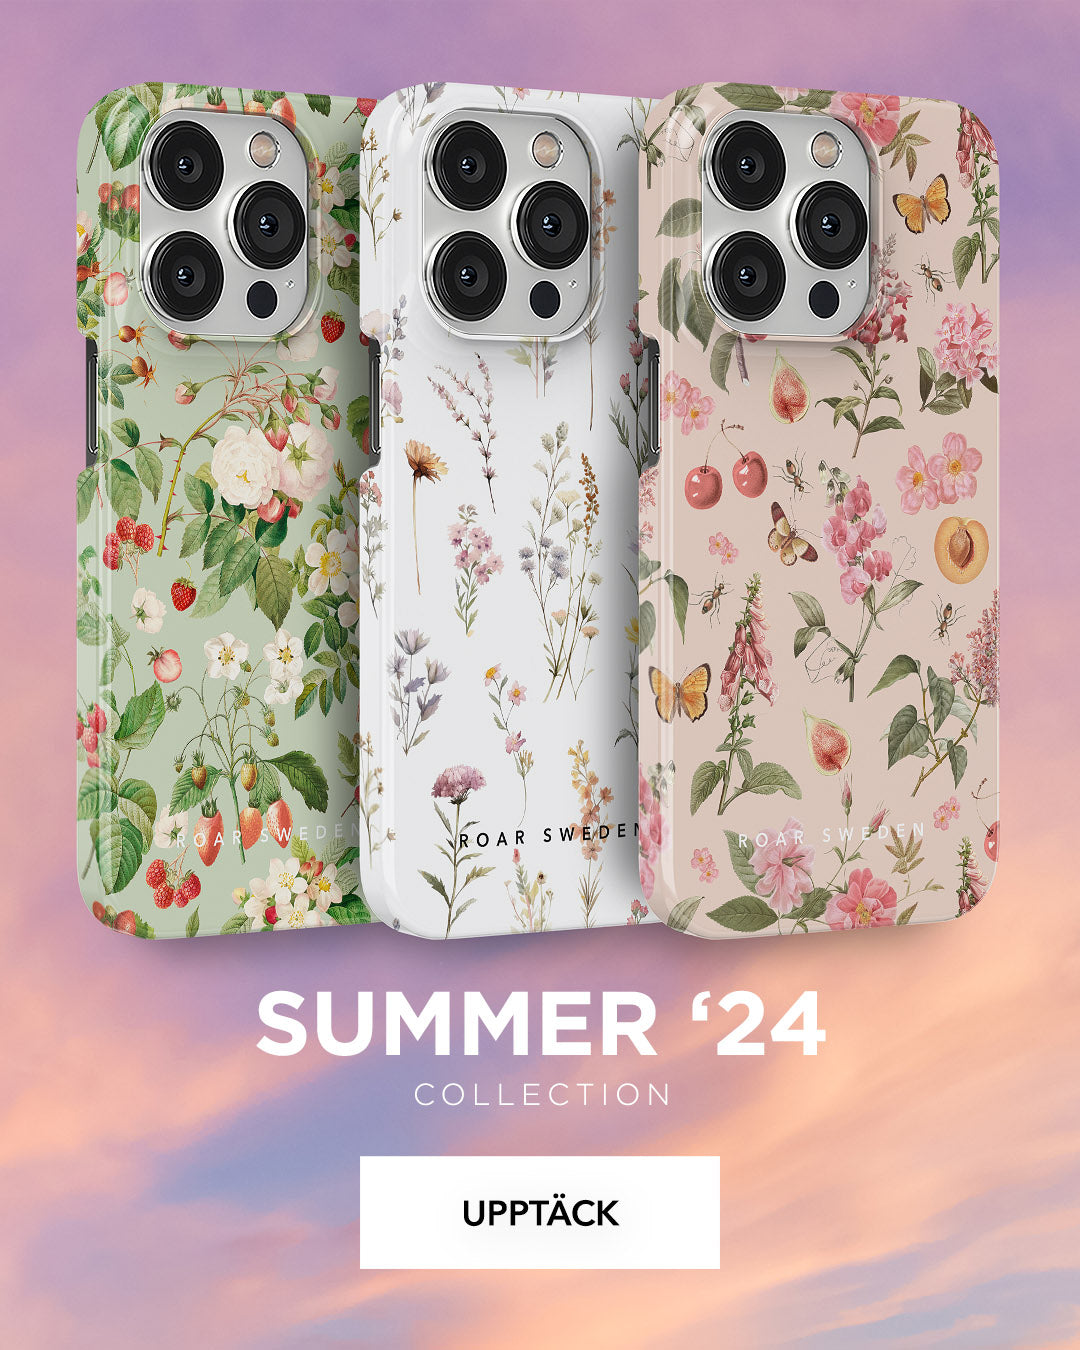 Collection of smartphones with floral-patterned cases against a sky backdrop, highlighting the spring 2024 collection.